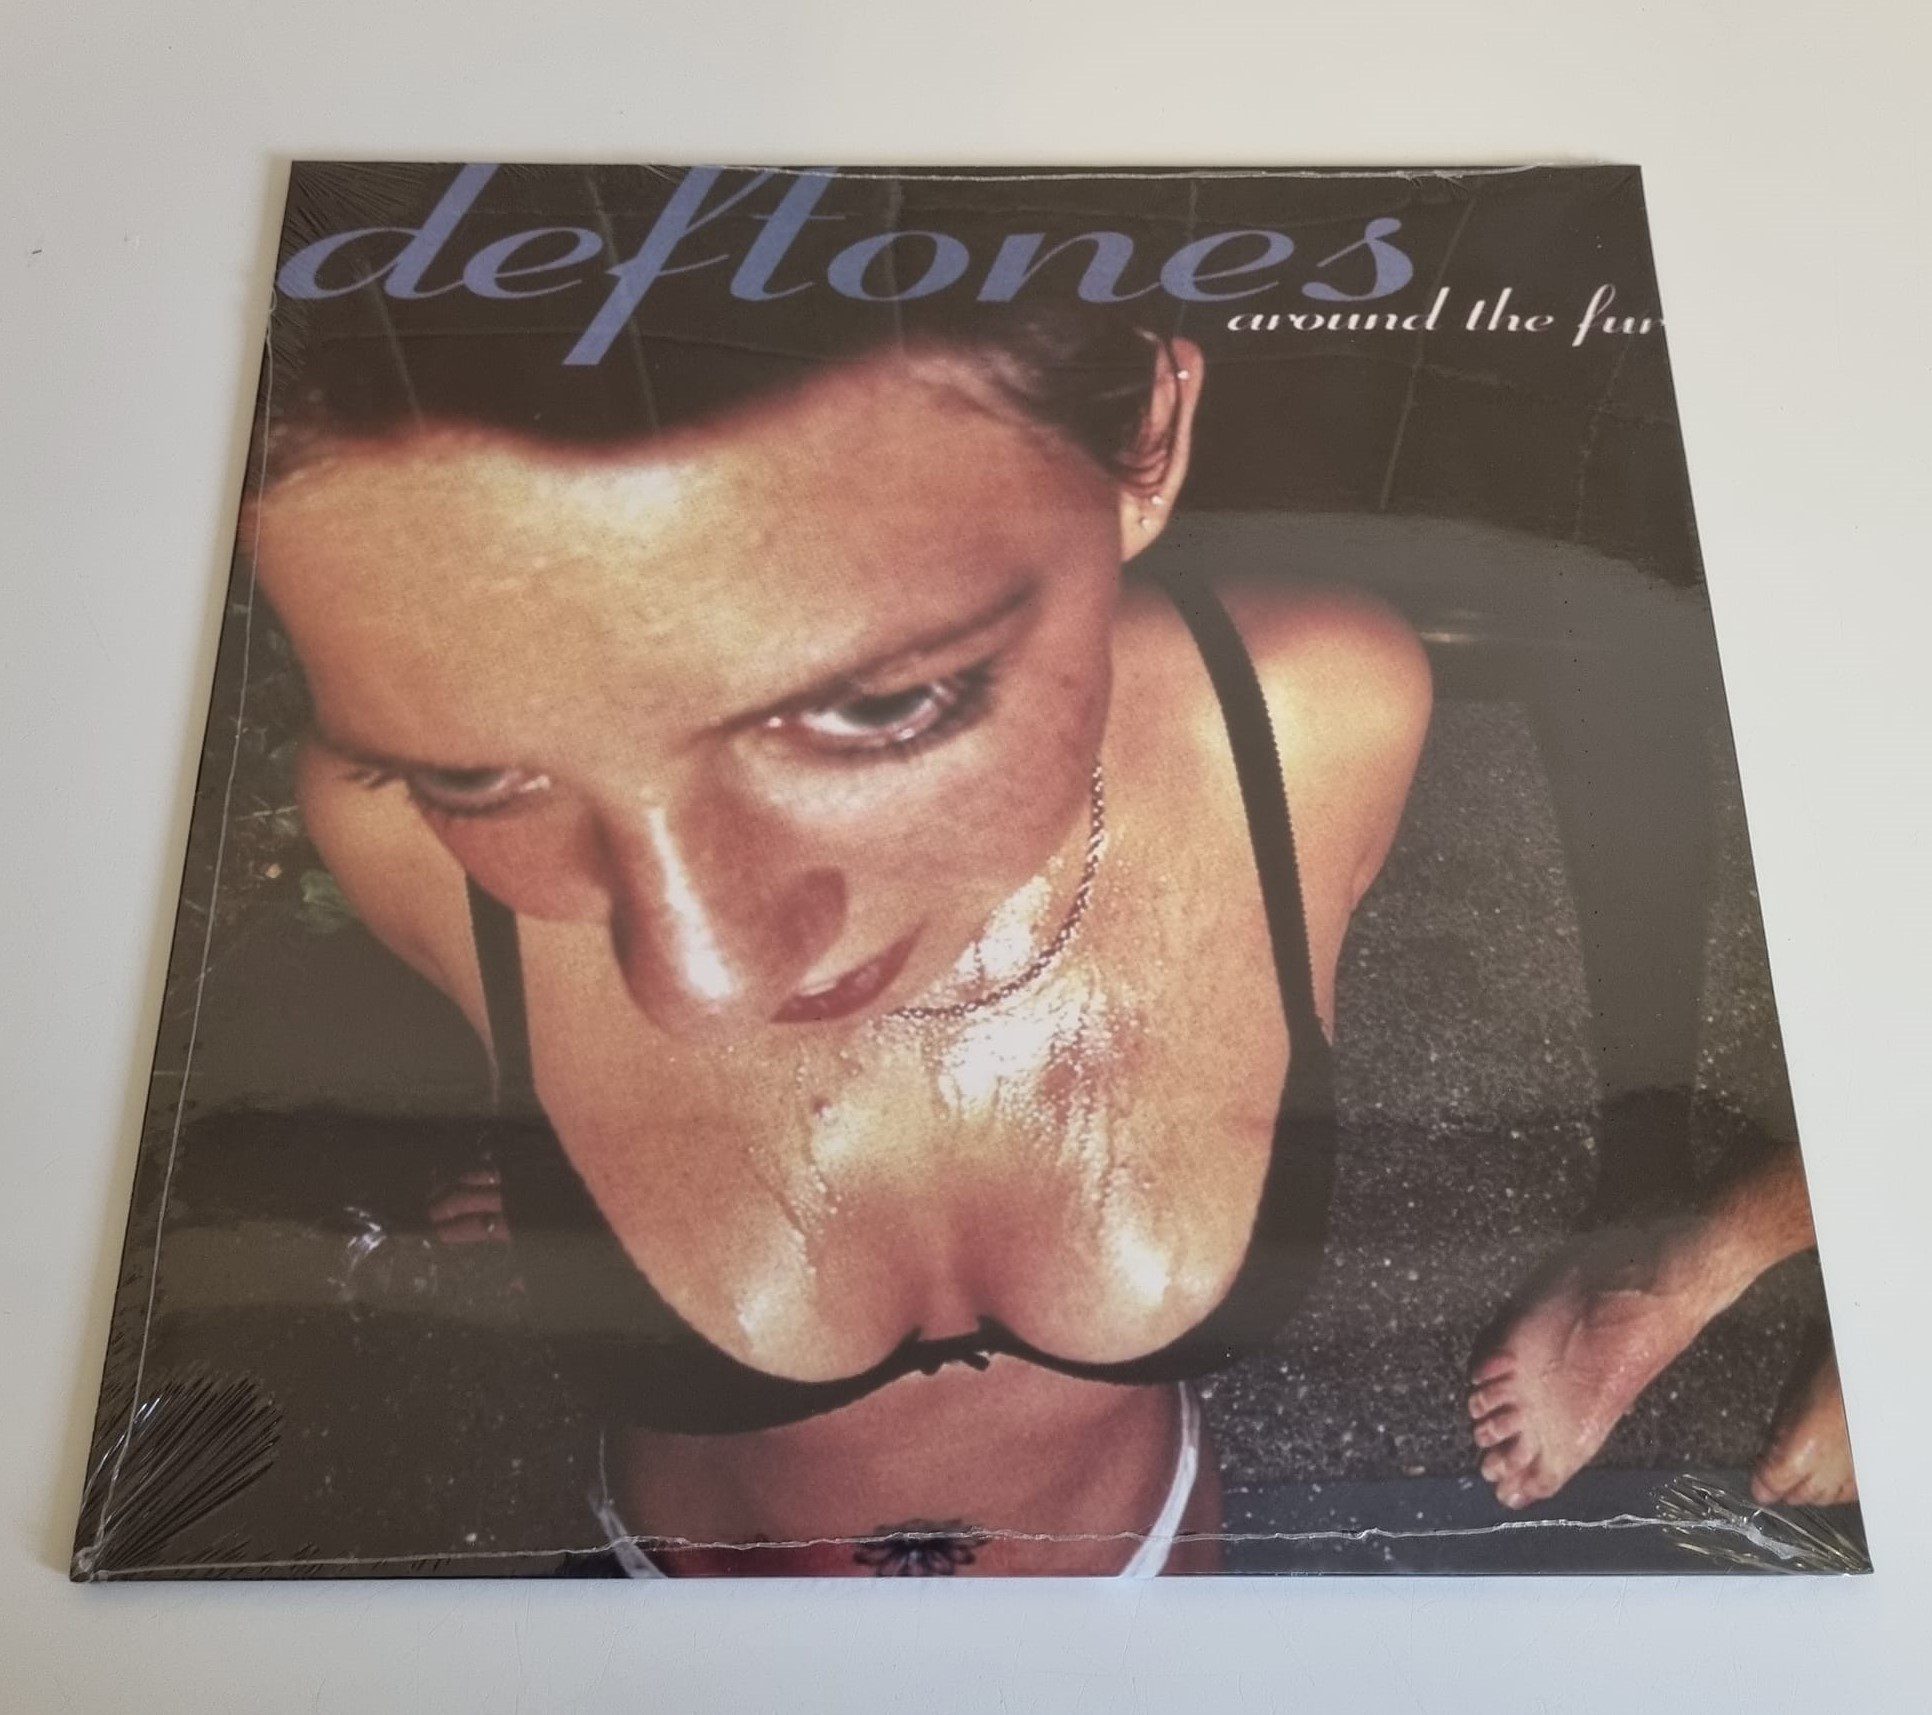 Buy this rare Deftones record by clicking here